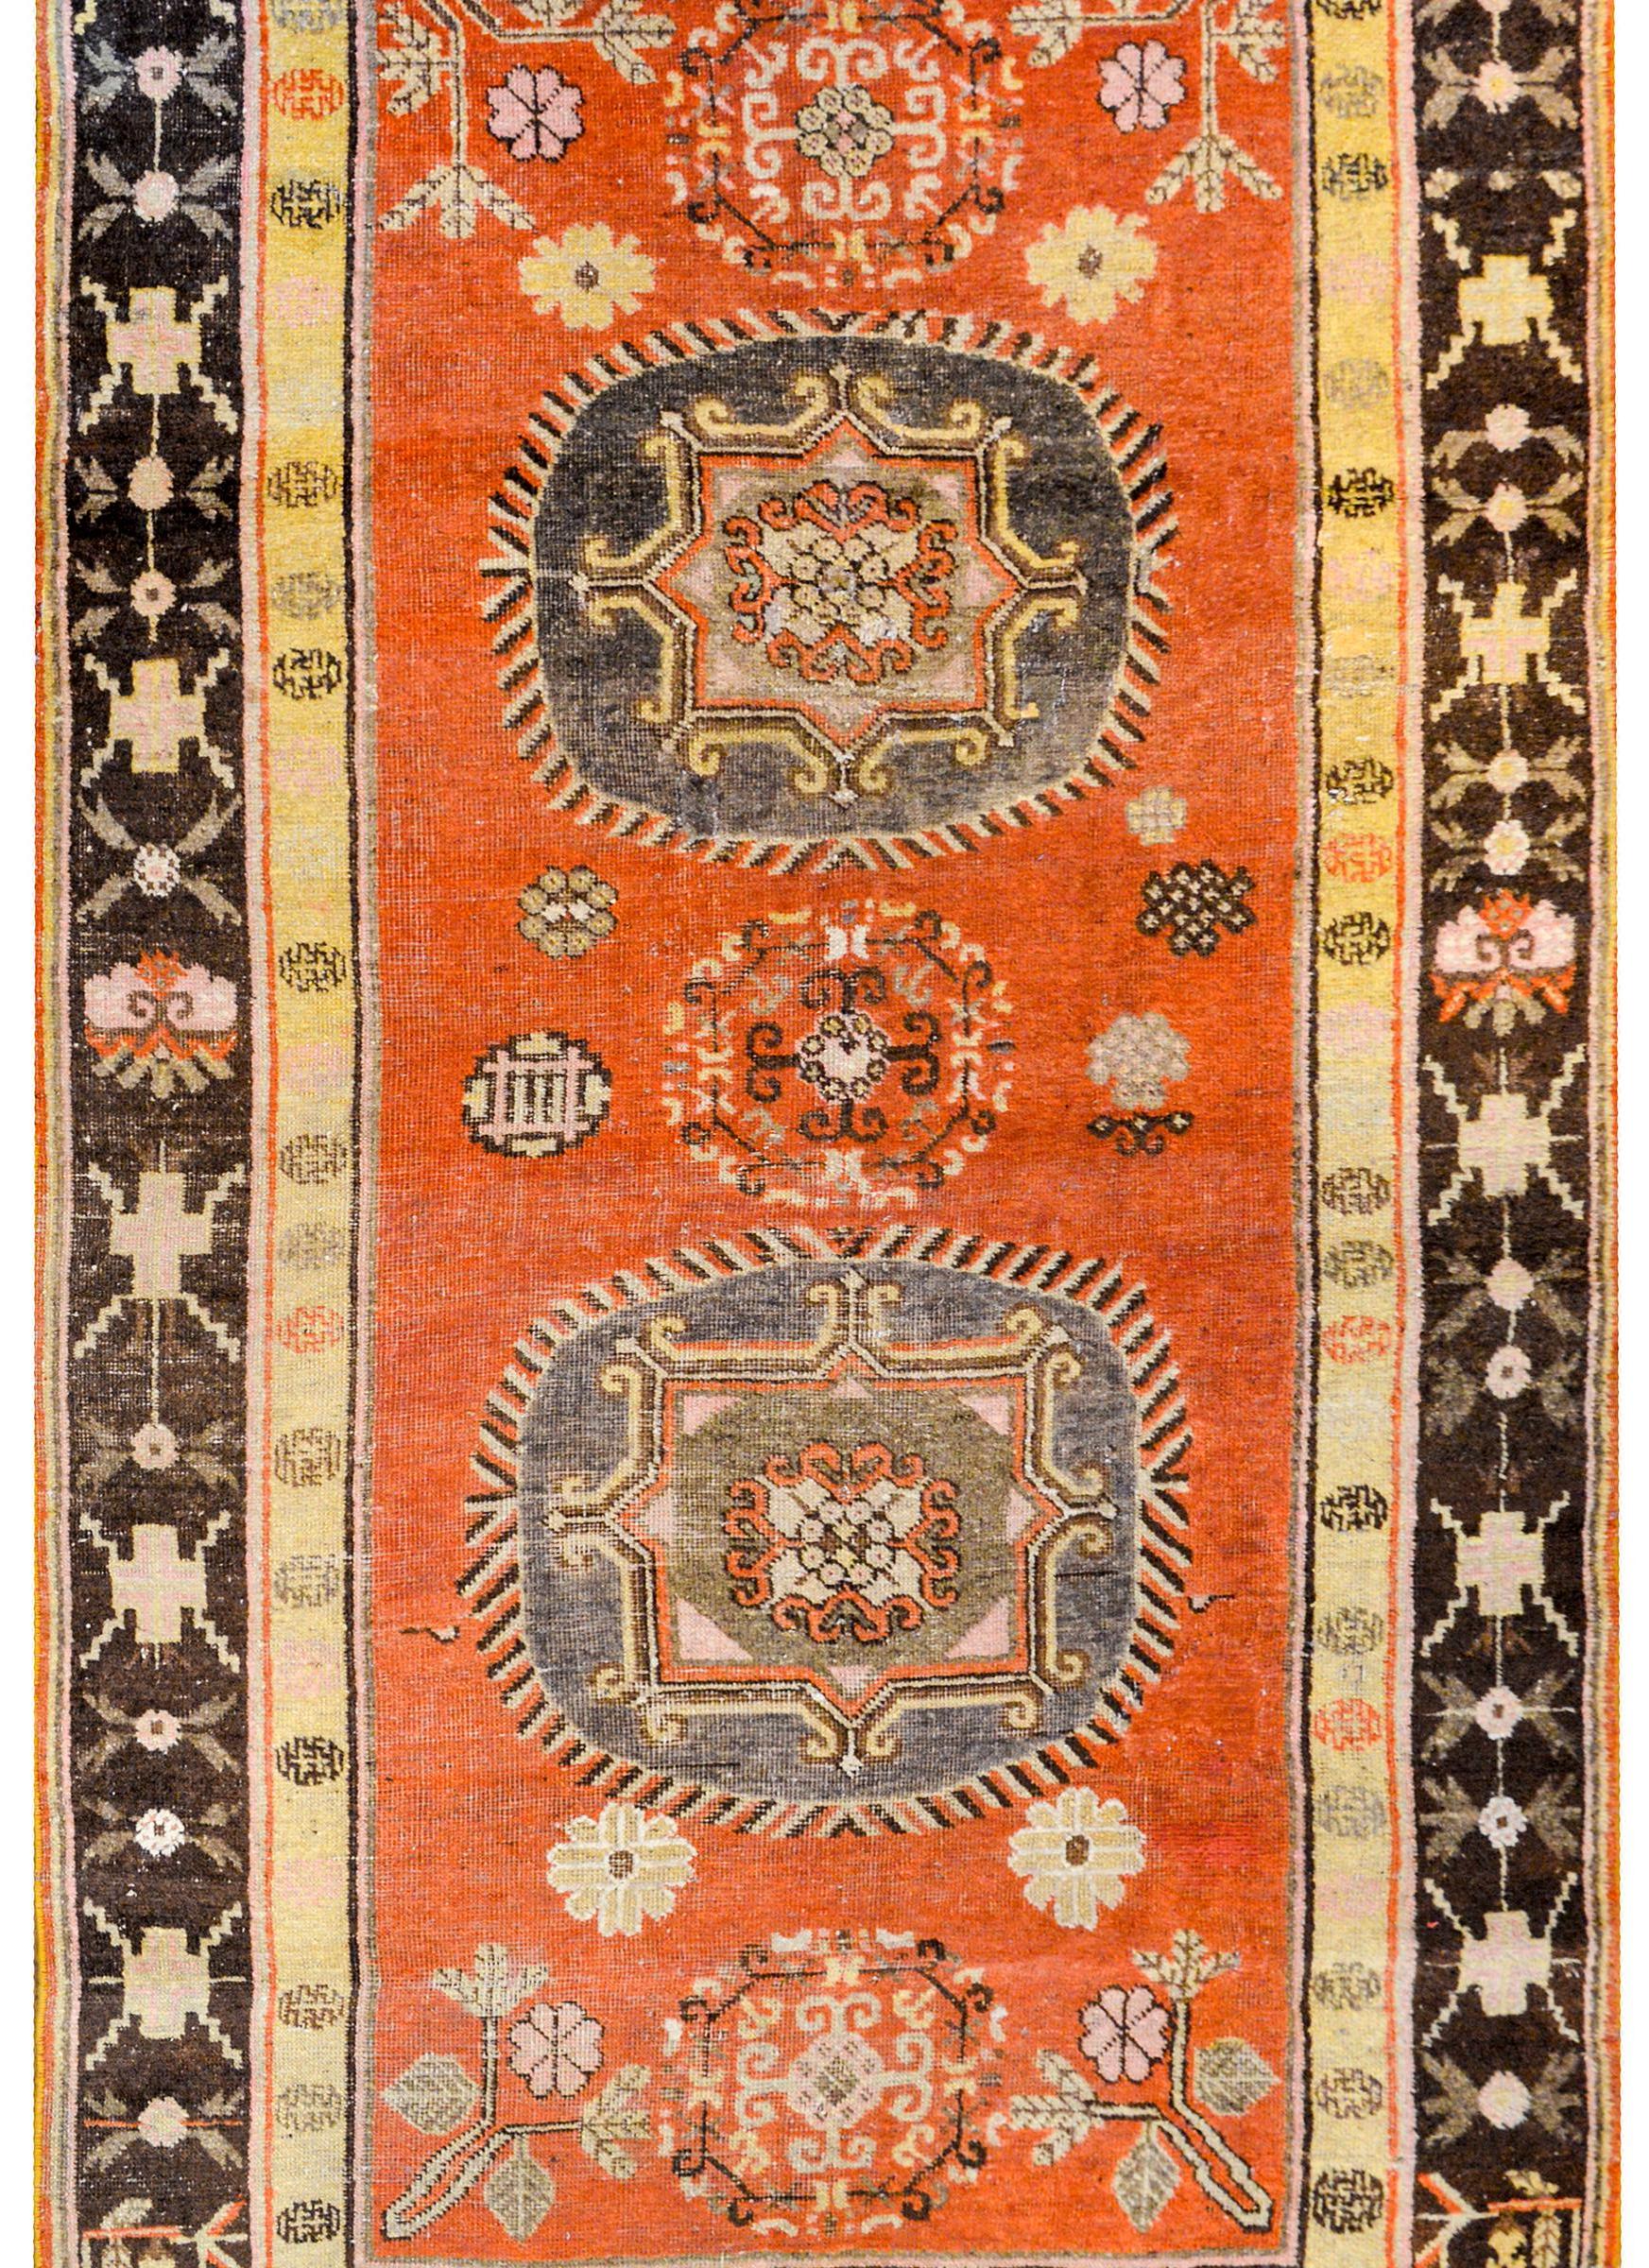 A wonderful early 20th century central Asian Samarghand rug with two large circular medallions woven in muted lavender on a bold orange field of peonies and other stylized flowers, surrounded by a beautiful brown border with more stylized flowers